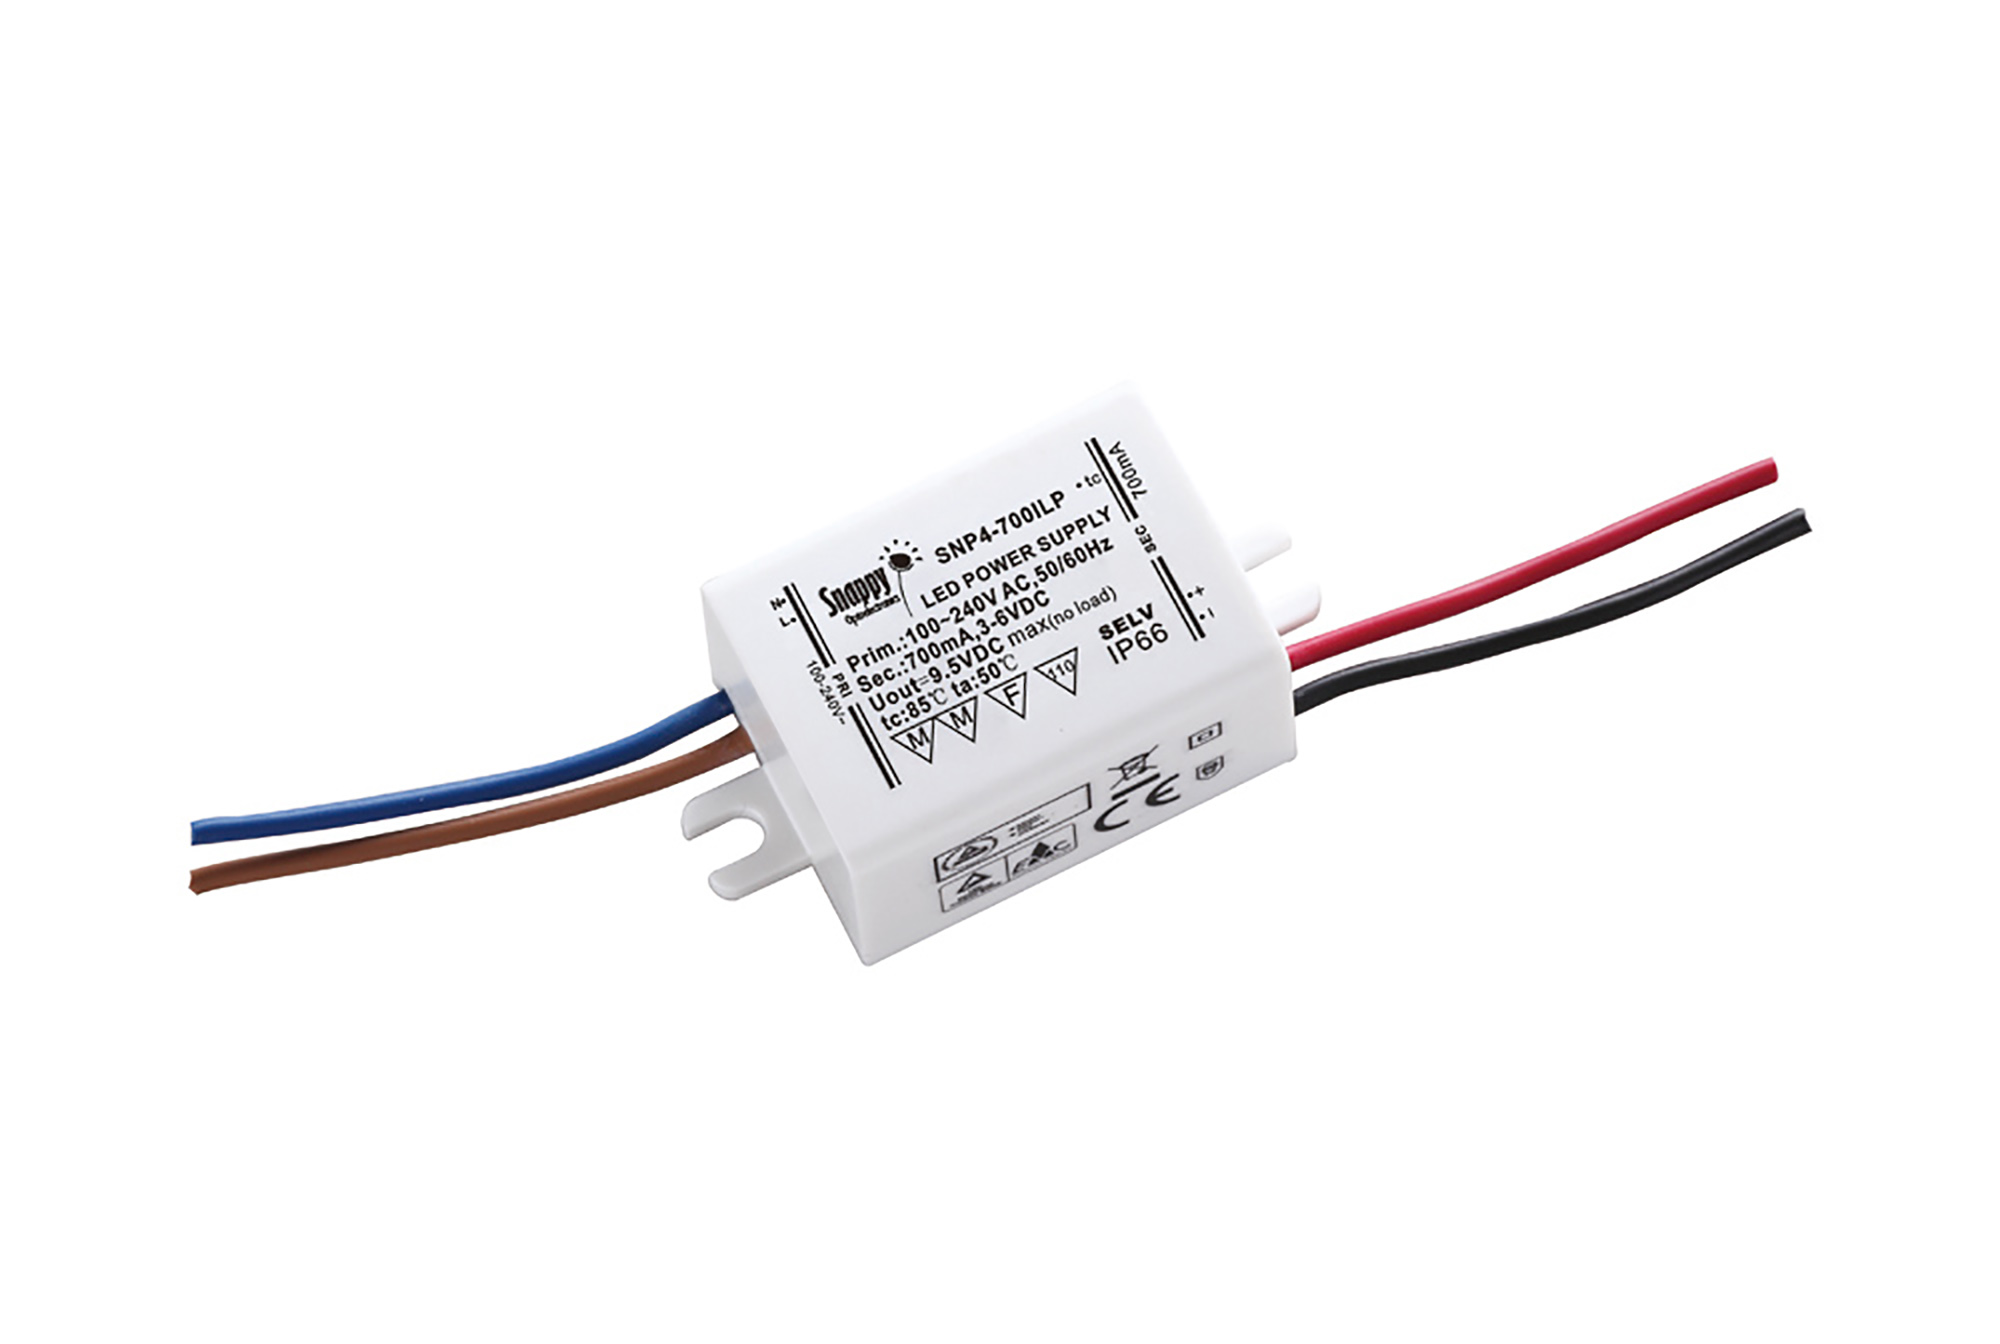 SNP4-700ILP  4W Constant Current Non-Dimmable LED Driver 700mA IP66